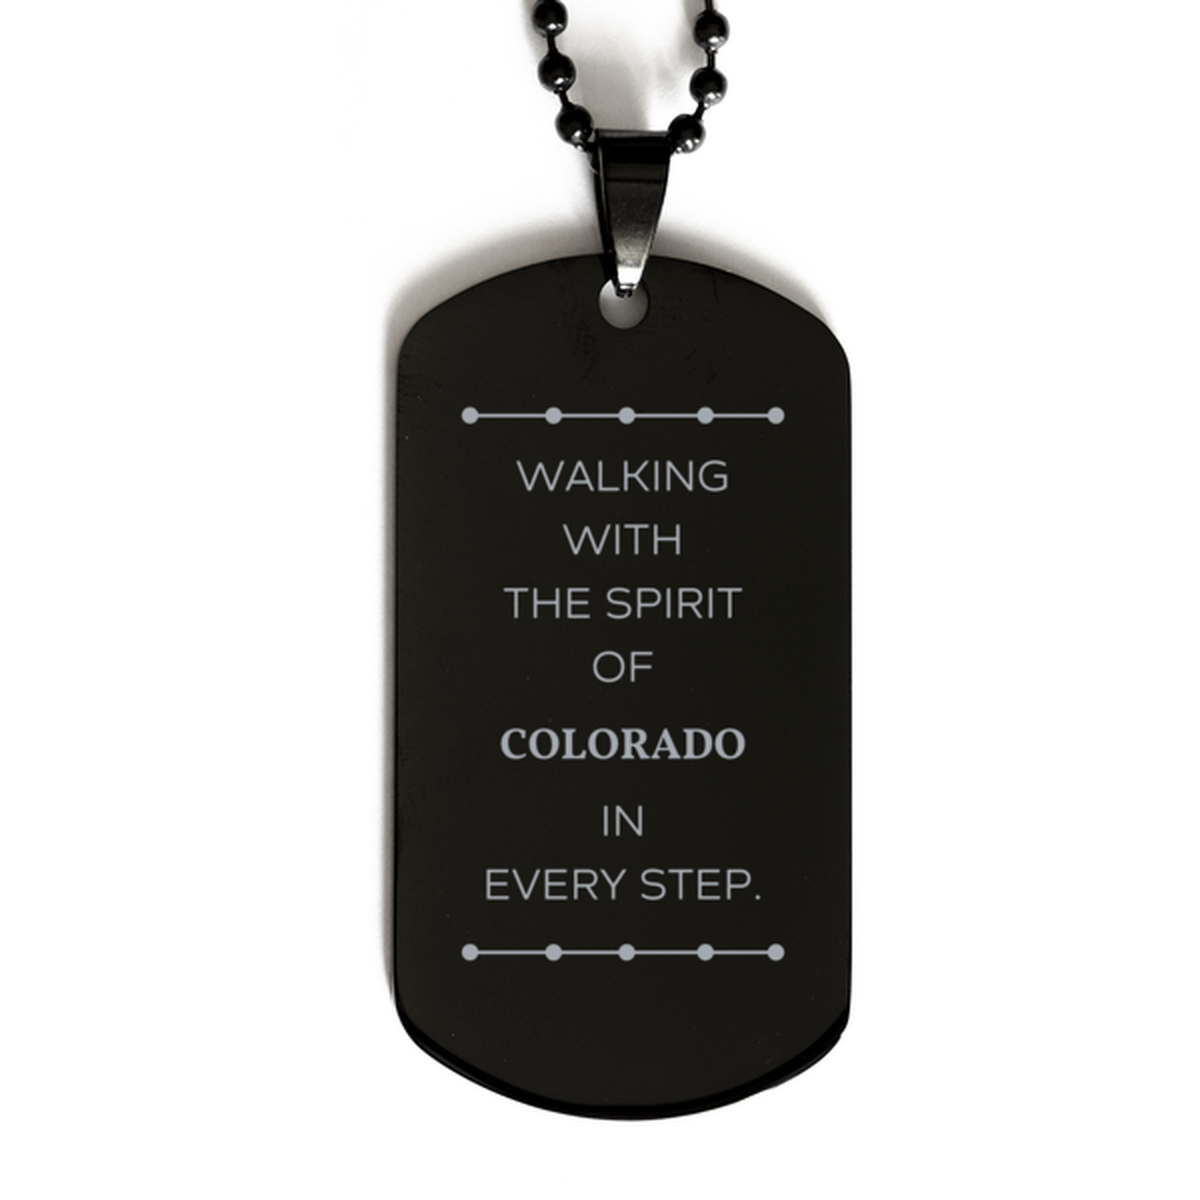 Colorado Gifts, Walking with the spirit, Love Colorado Birthday Christmas Black Dog Tag For Colorado People, Men, Women, Friends